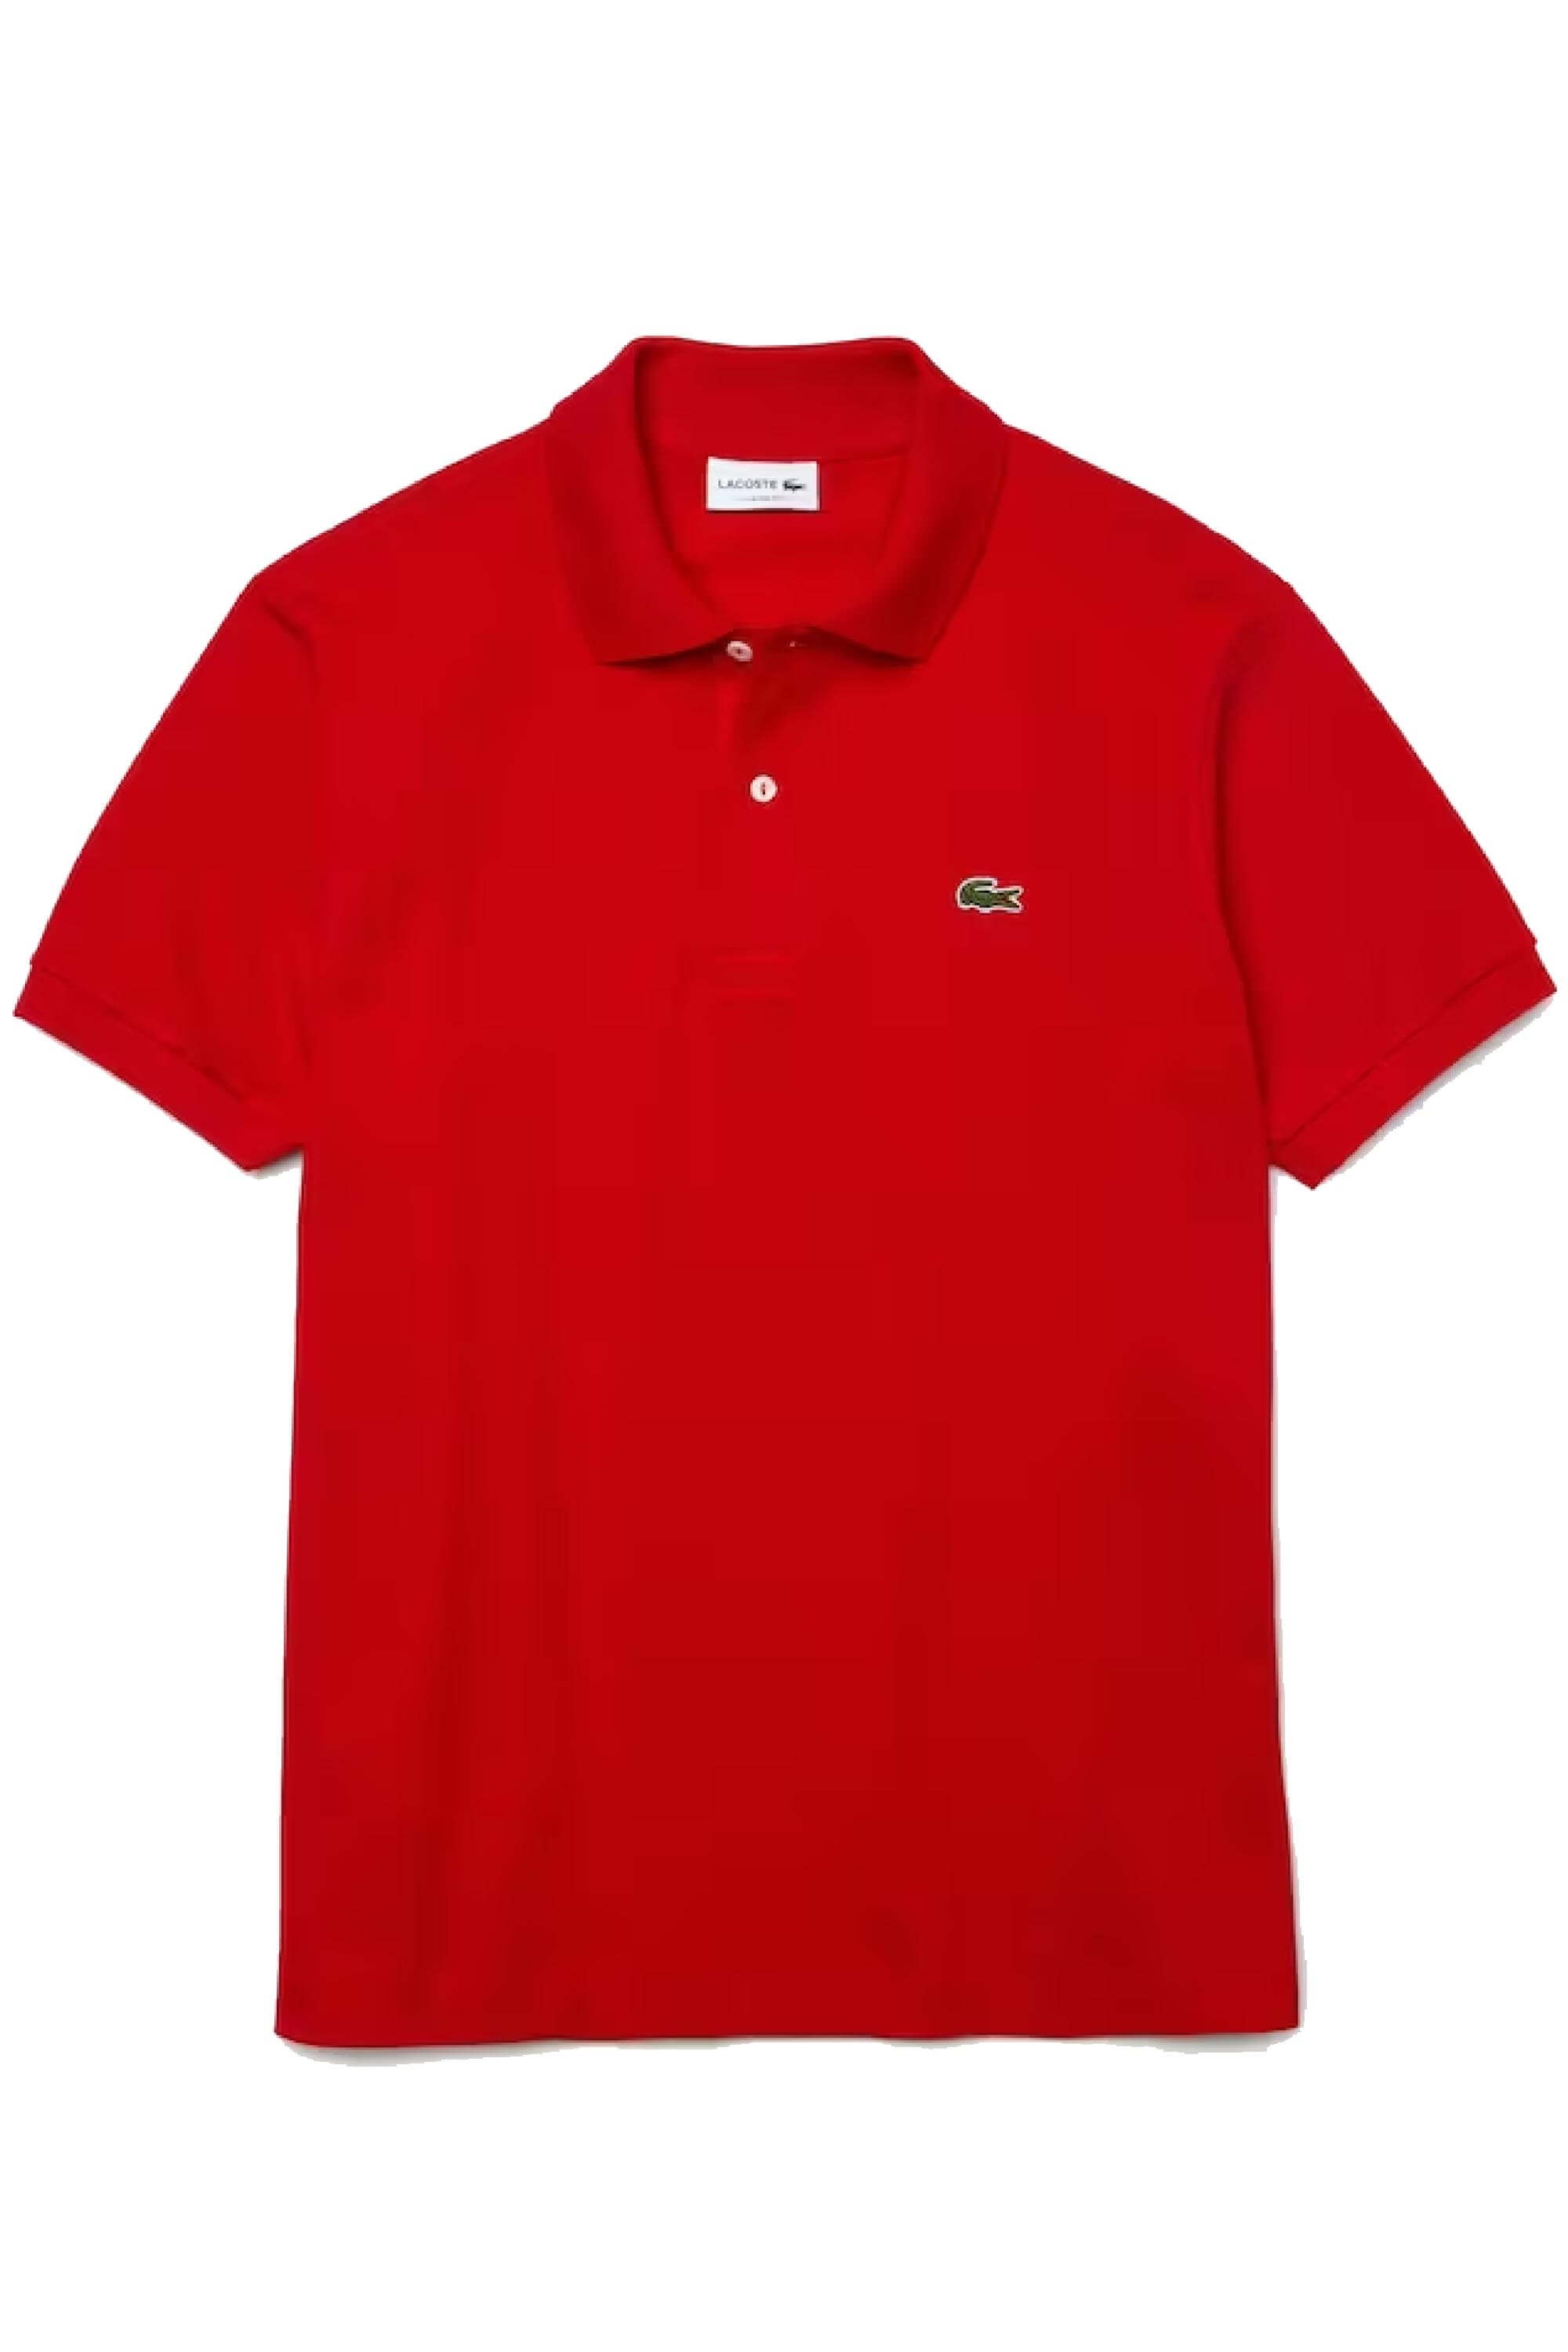 Lacoste Classic Fit Polo Red